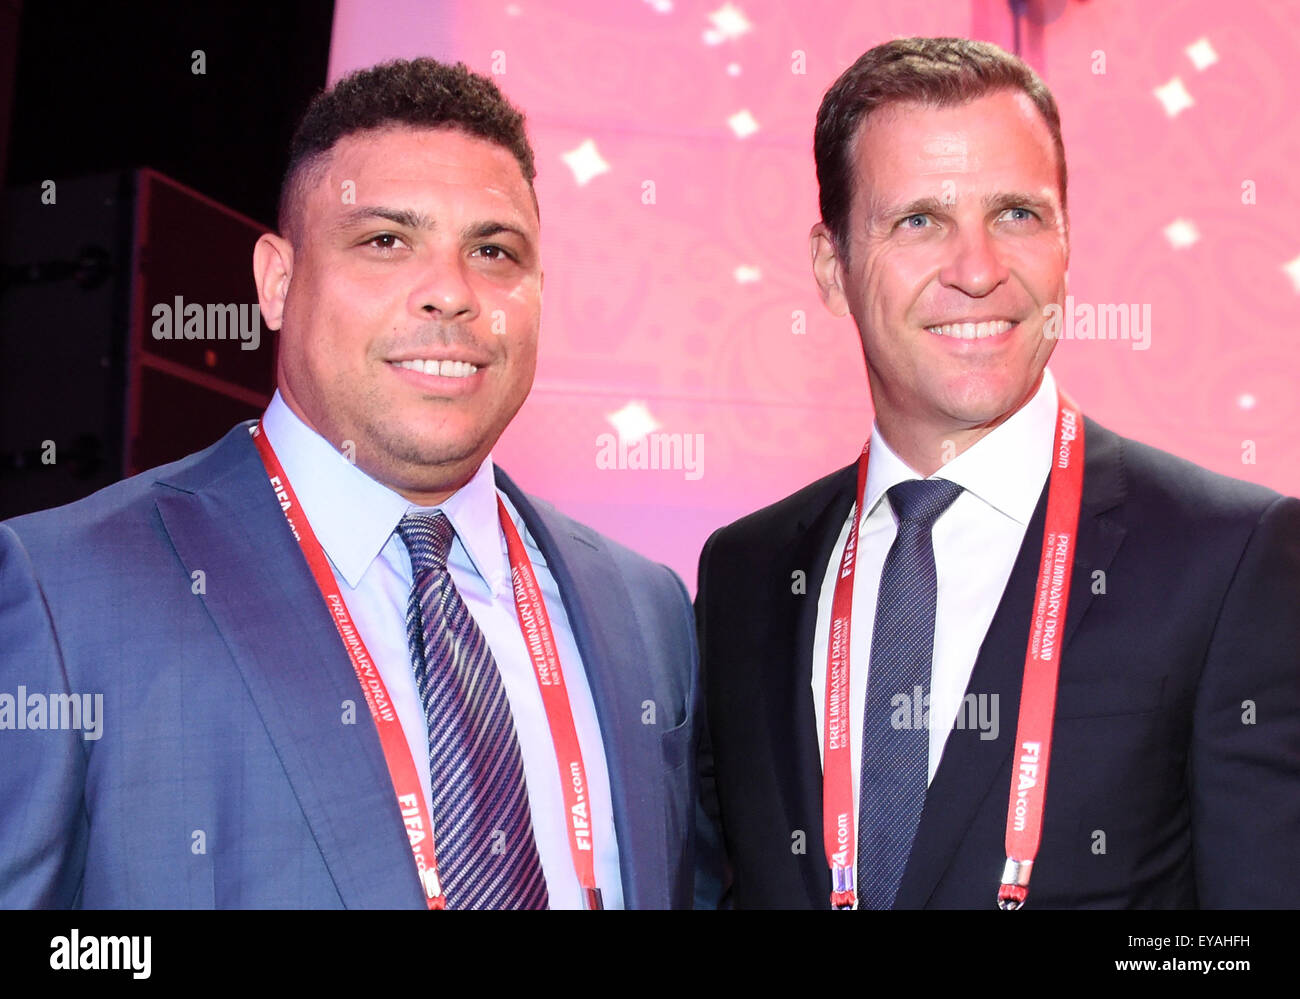 St. Petersburg, Russia. 25th July, 2015. Oliver Bierhoff (R), team manager of the German national soccer team, and former professional soccer player Ronaldo from Brazil attend the Preliminary Draw of the FIFA World Cup 2018 in St. Petersburg, Russia, 25 July 2015. St. Petersburg is one of the host cities of the FIFA World Cup 2018 in Russia which will take place from 14 June until 15 July 2018. Photo: MARCUS BRANDT/dpa Credit:  dpa picture alliance/Alamy Live News Stock Photo